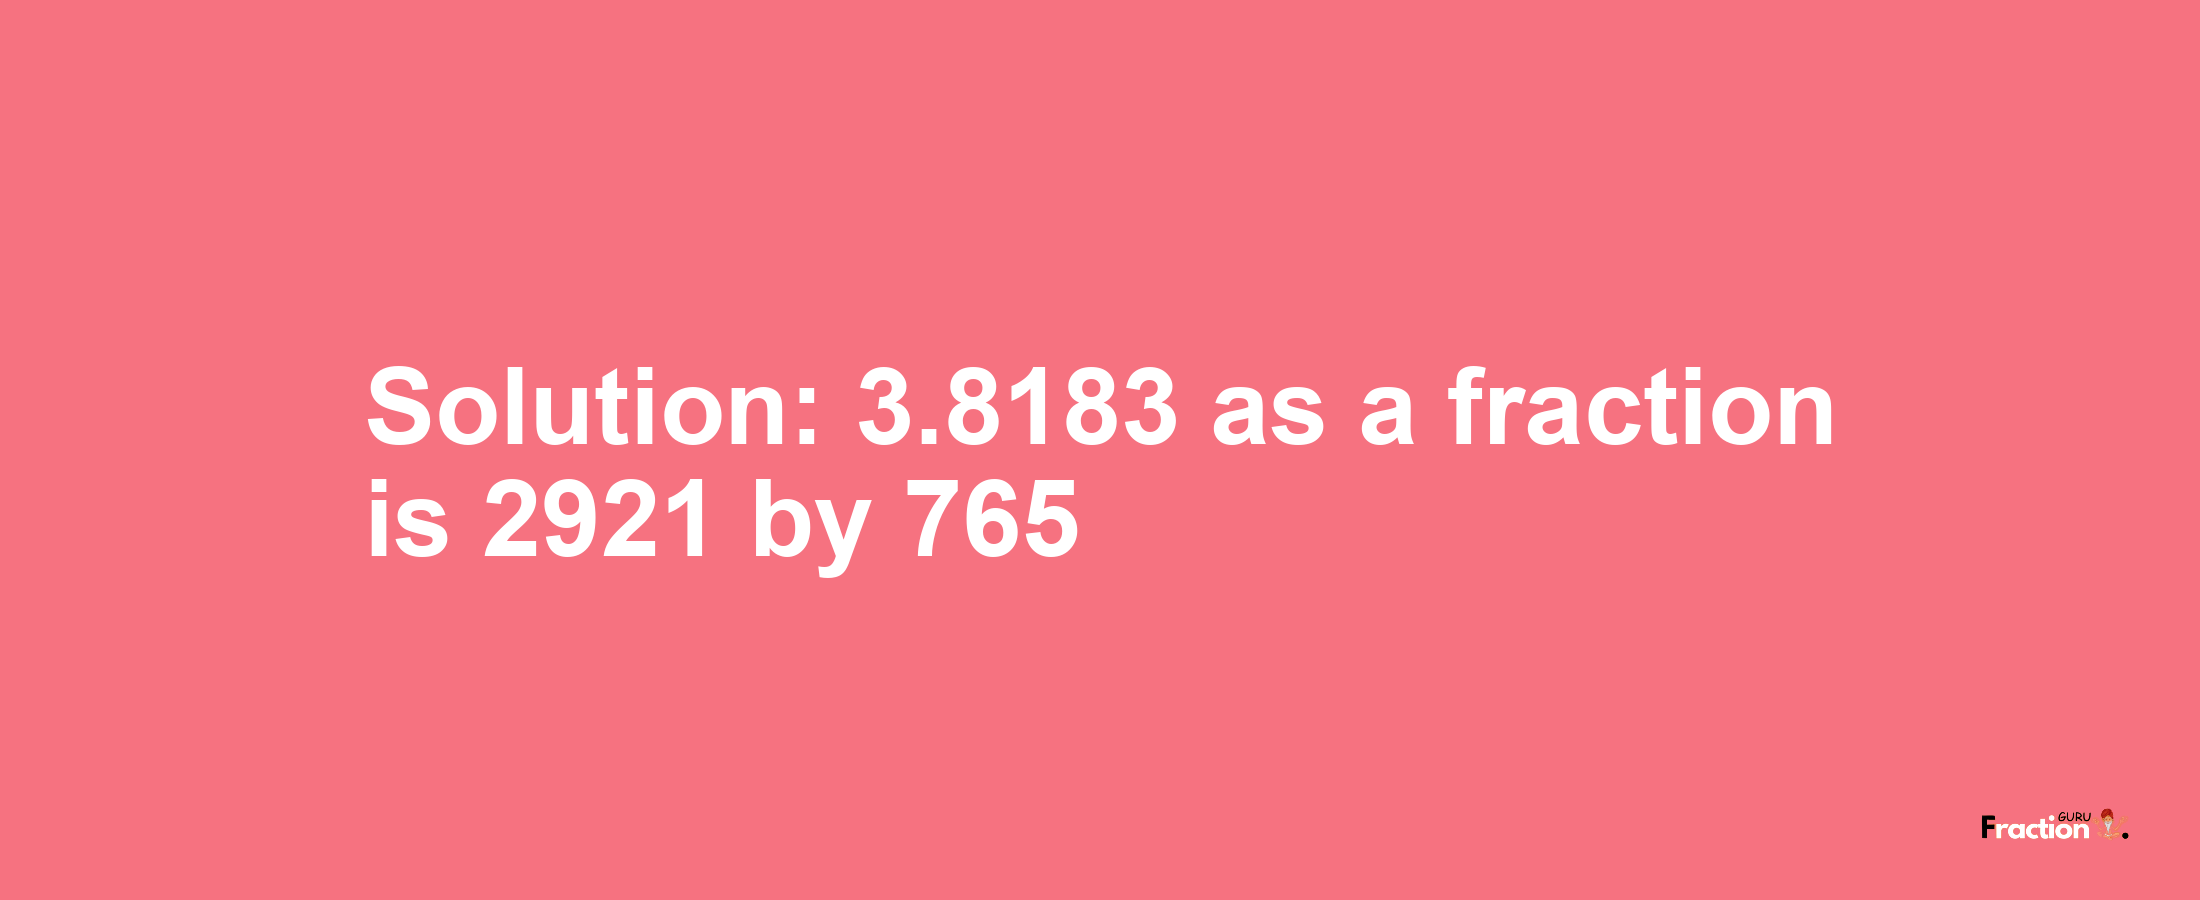 Solution:3.8183 as a fraction is 2921/765